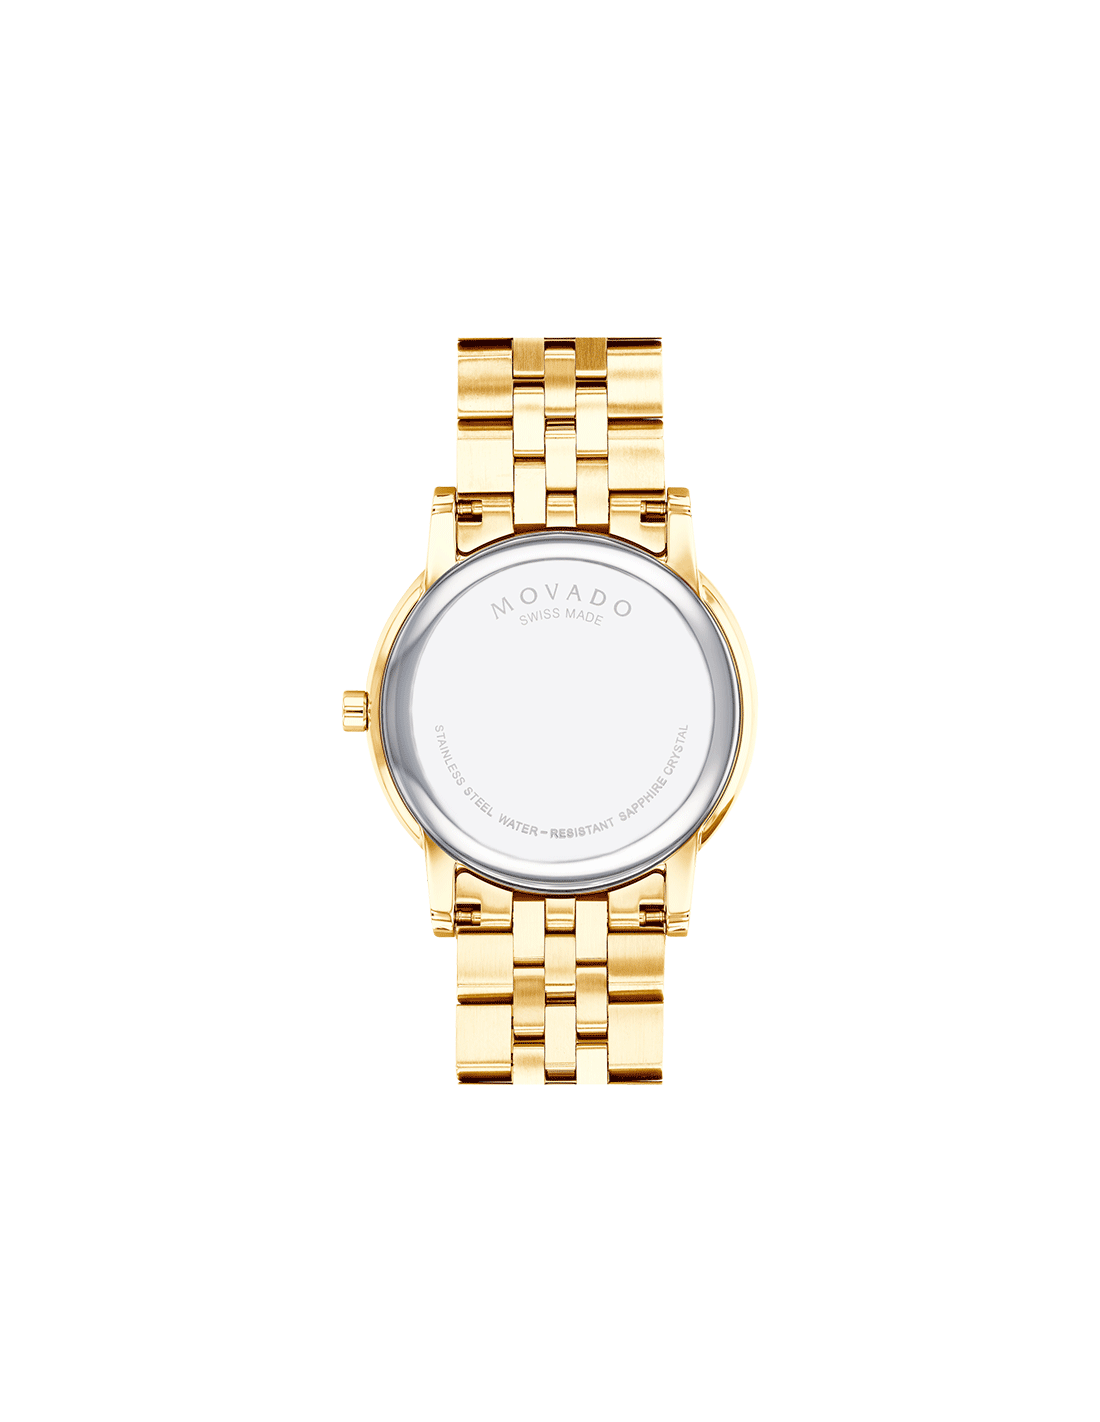 Watch 607203 House in I Movado Buy Time India Swiss